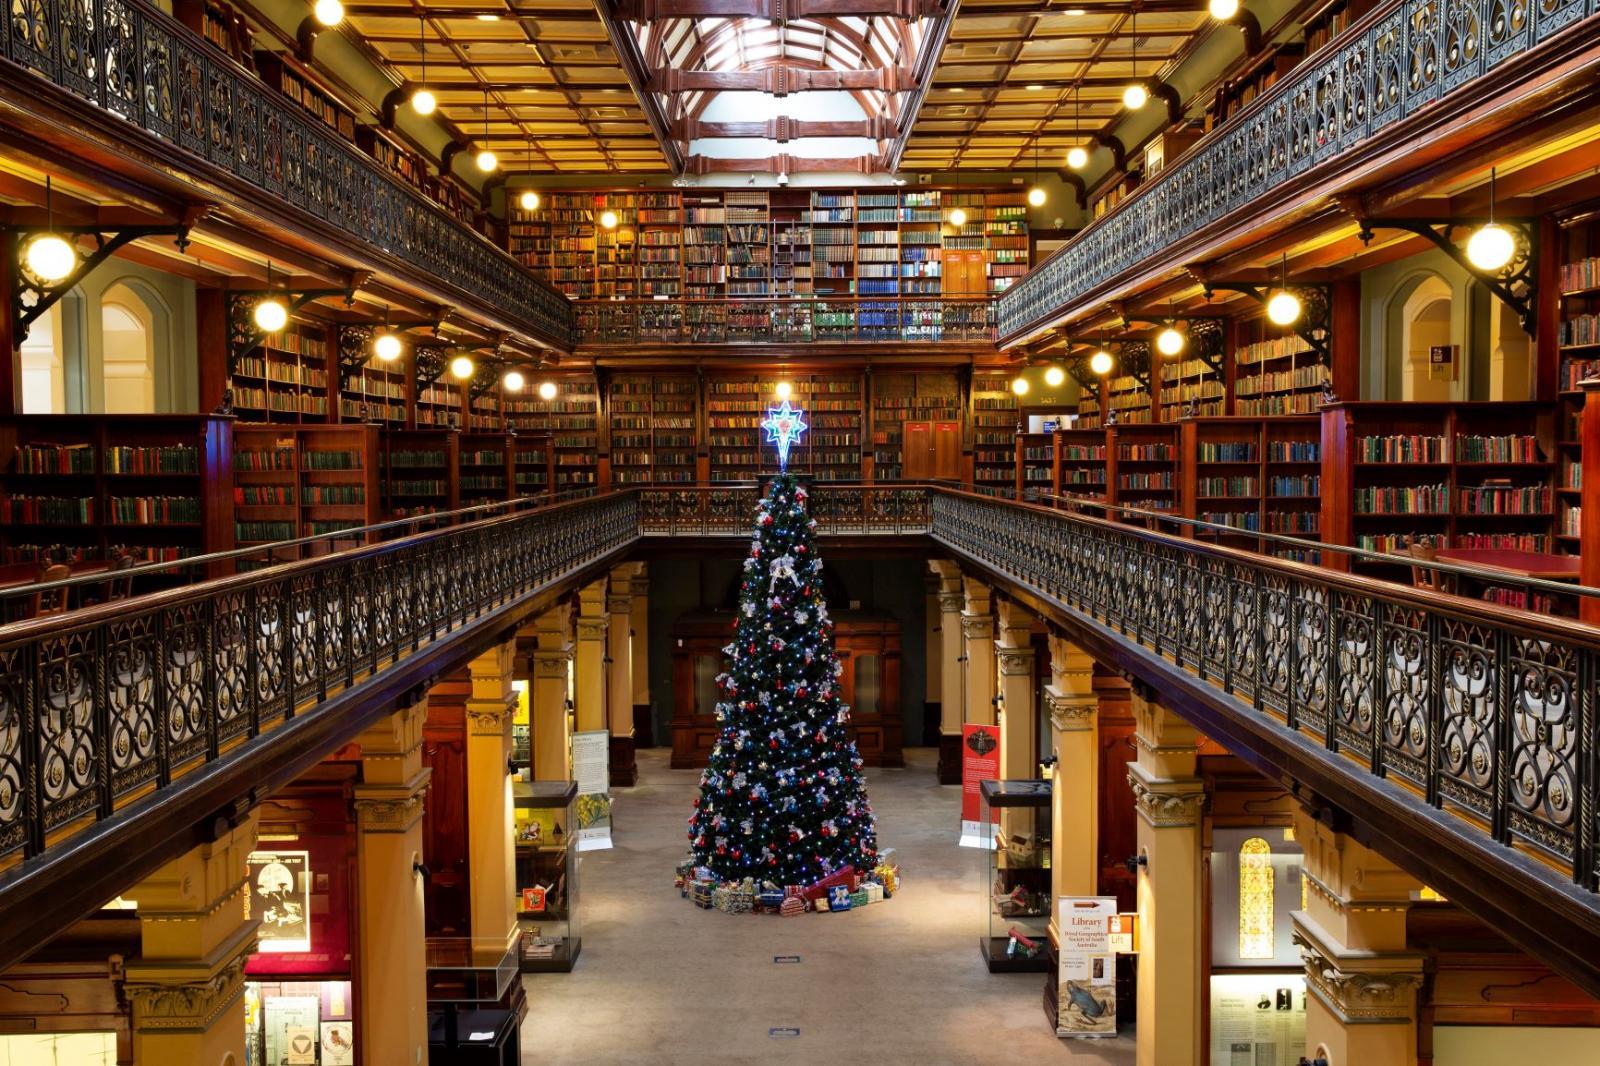 Christmas tree lit up in the Mortlock Chamber, State Library of South Australia